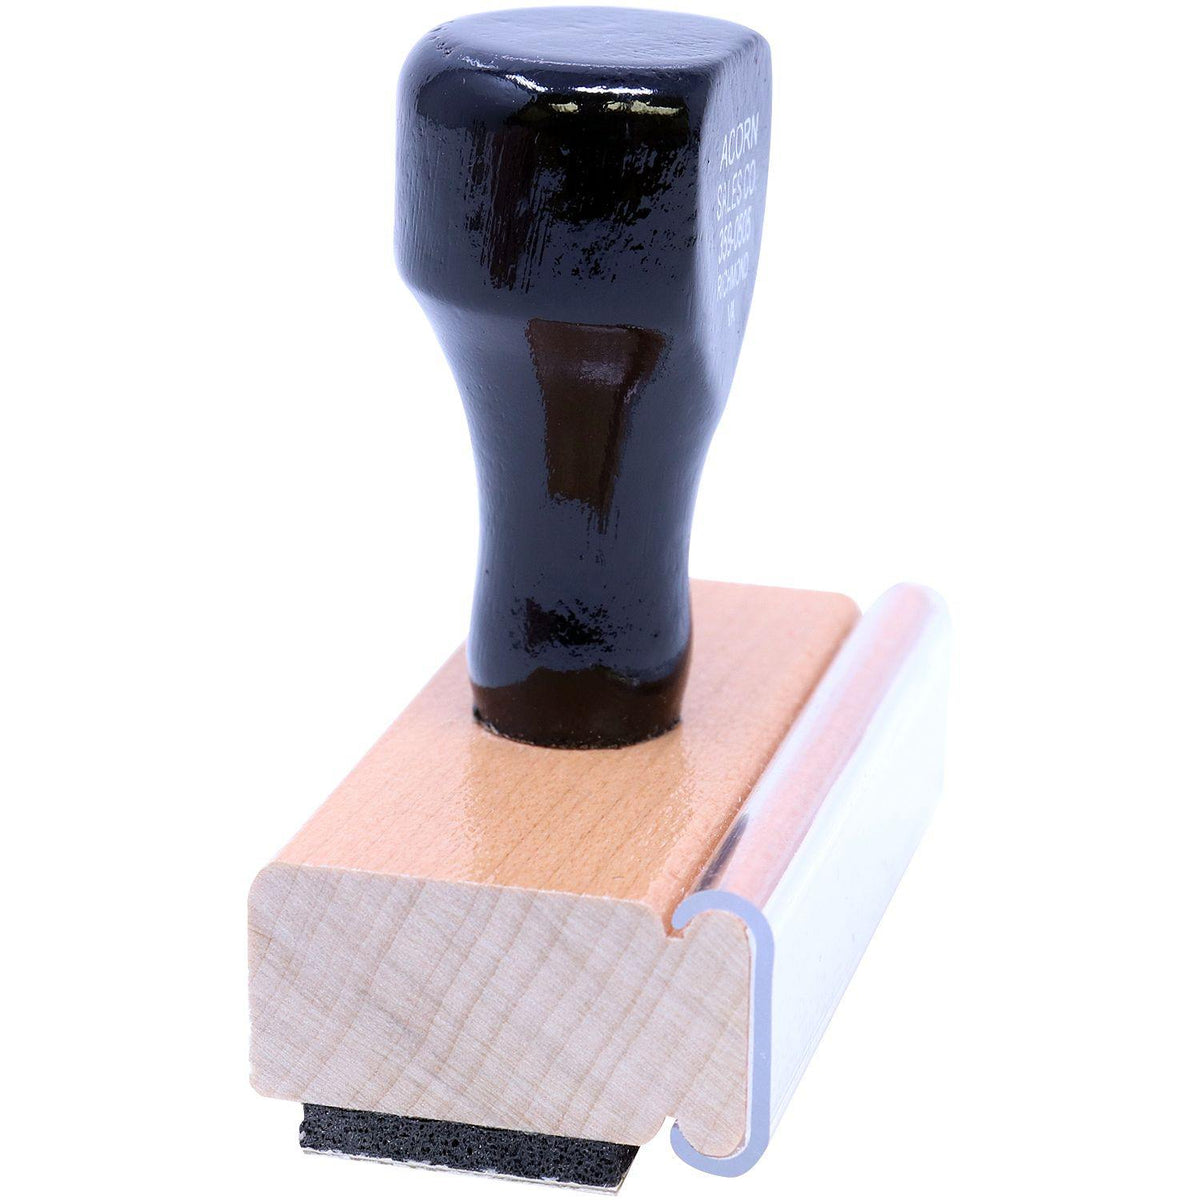 Side View of Large Mailed with Date Line Rubber Stamp at an Angle